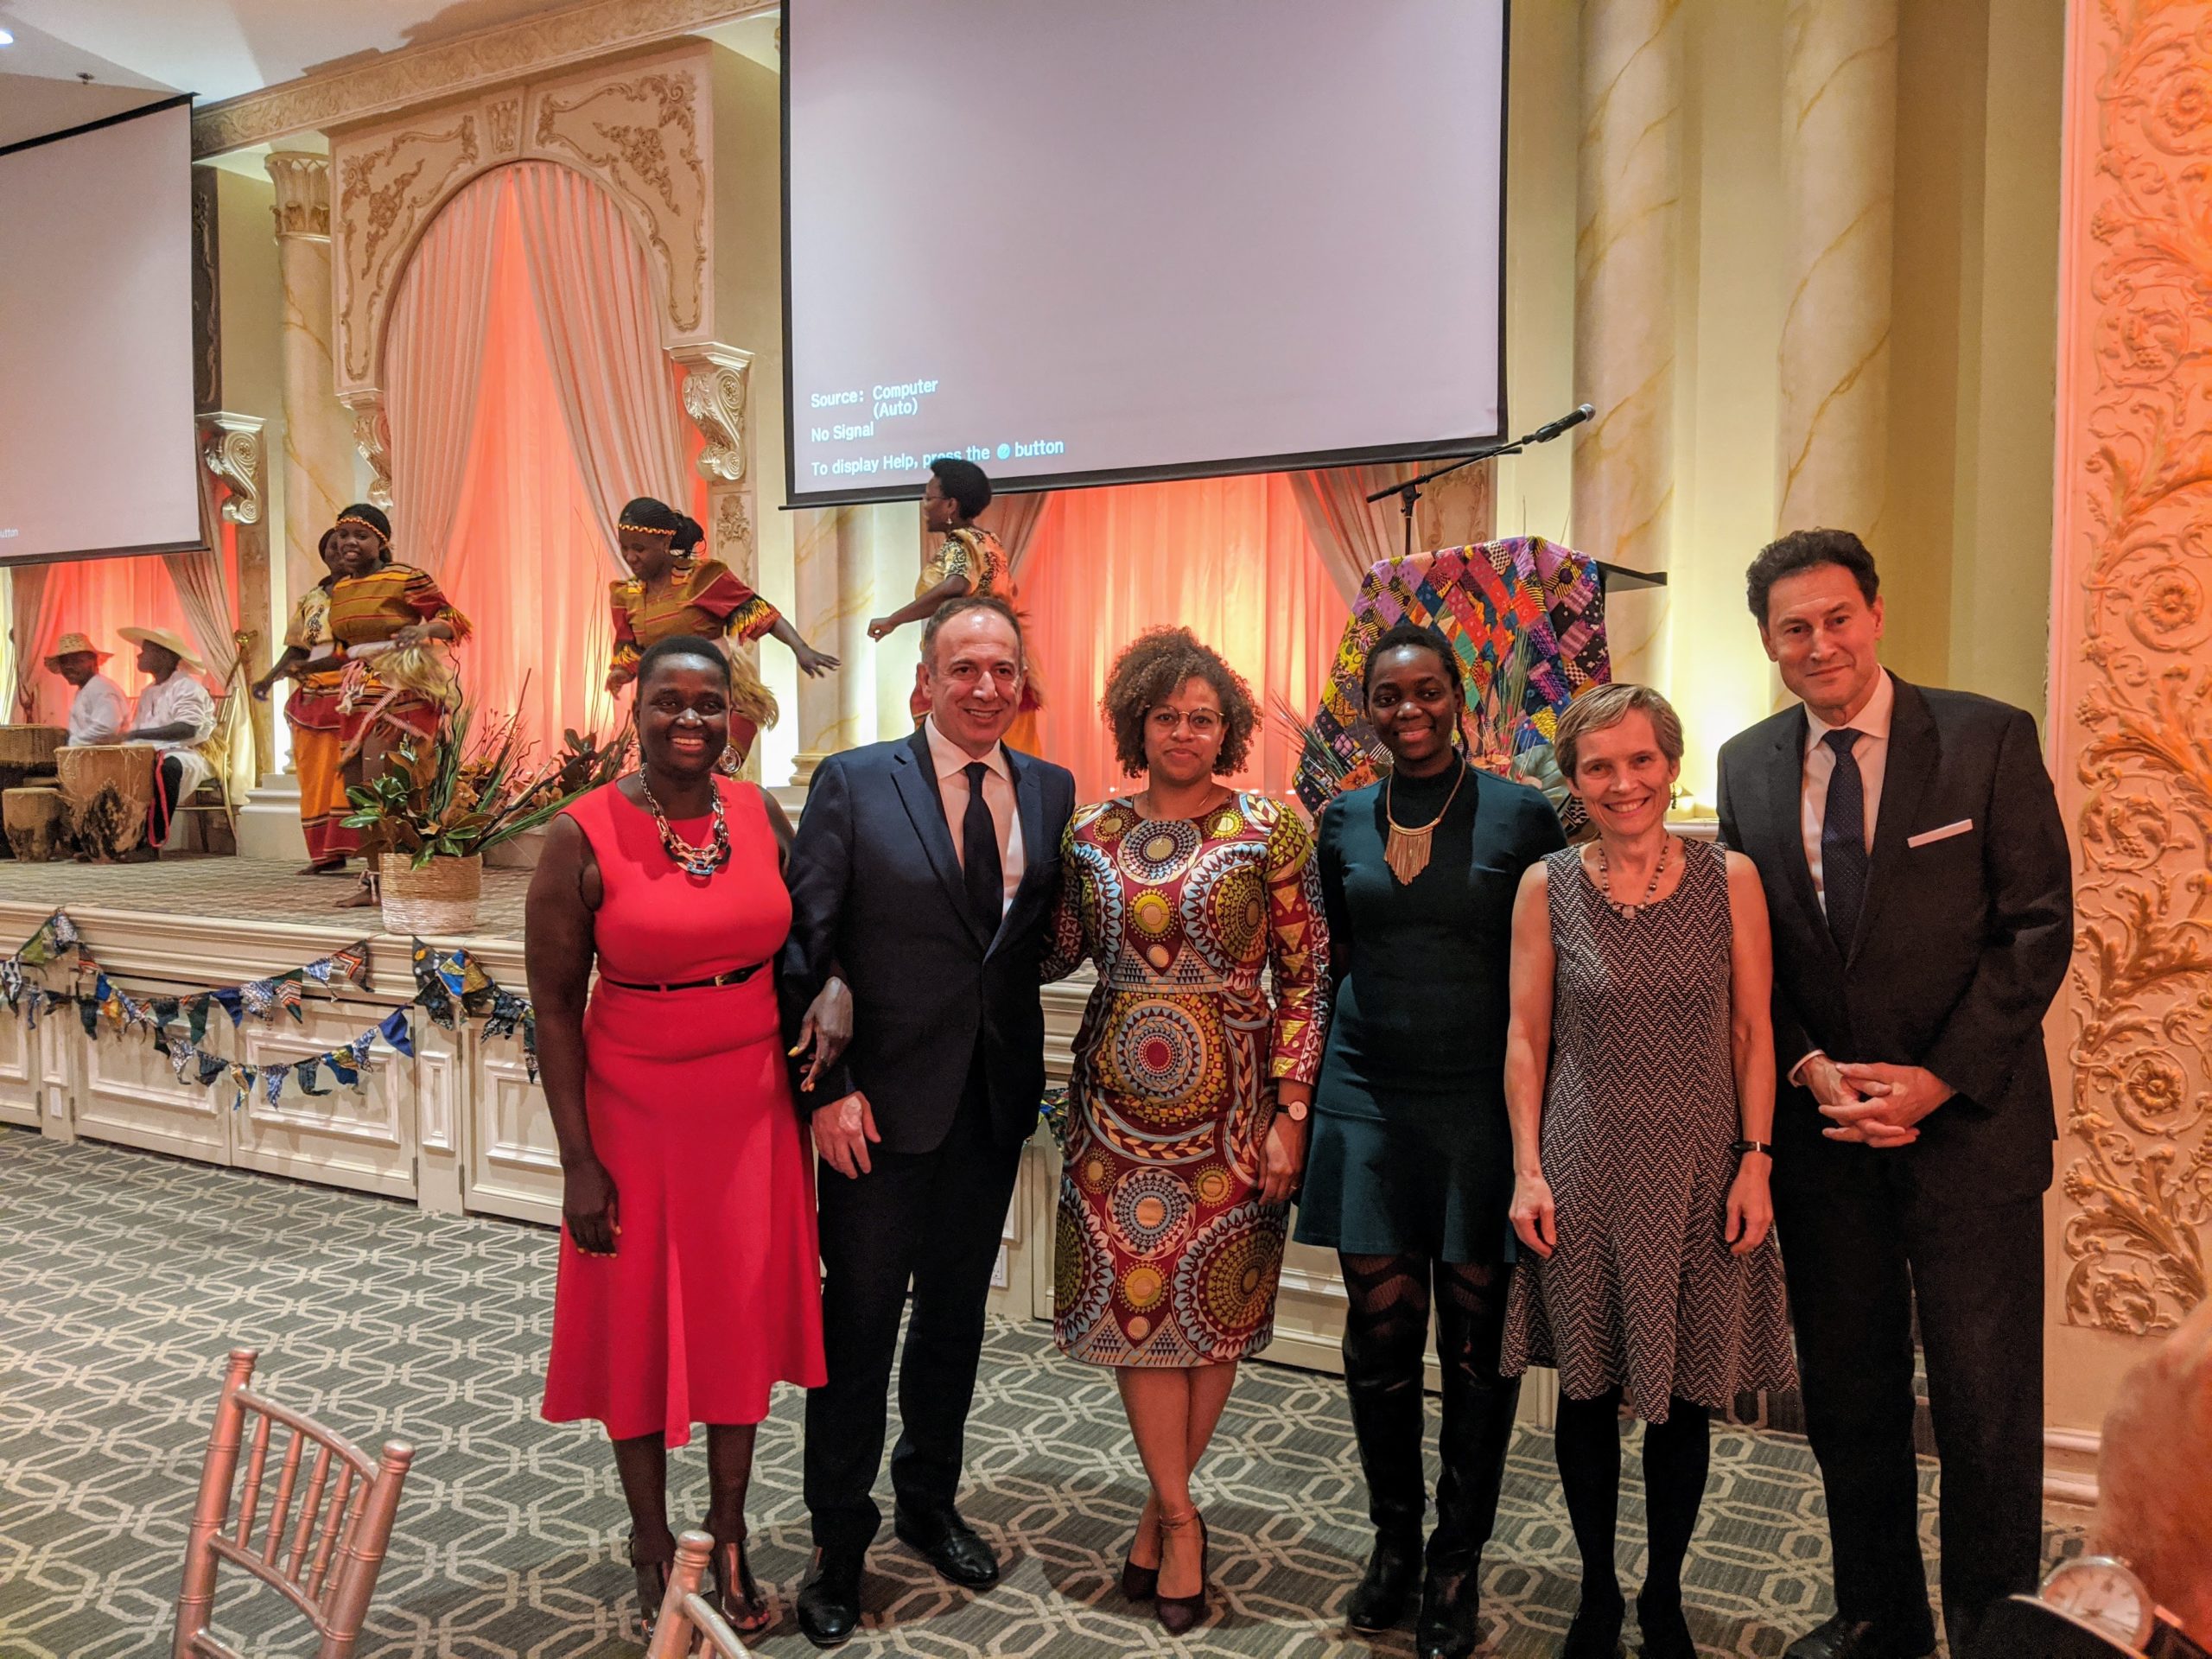 Deborah Mensah with the Mayor of Vaughan, hosts Steve Paikin and Lilly Obina, and Dr. Jean Chamberlain Froese at the 2019 Gala.